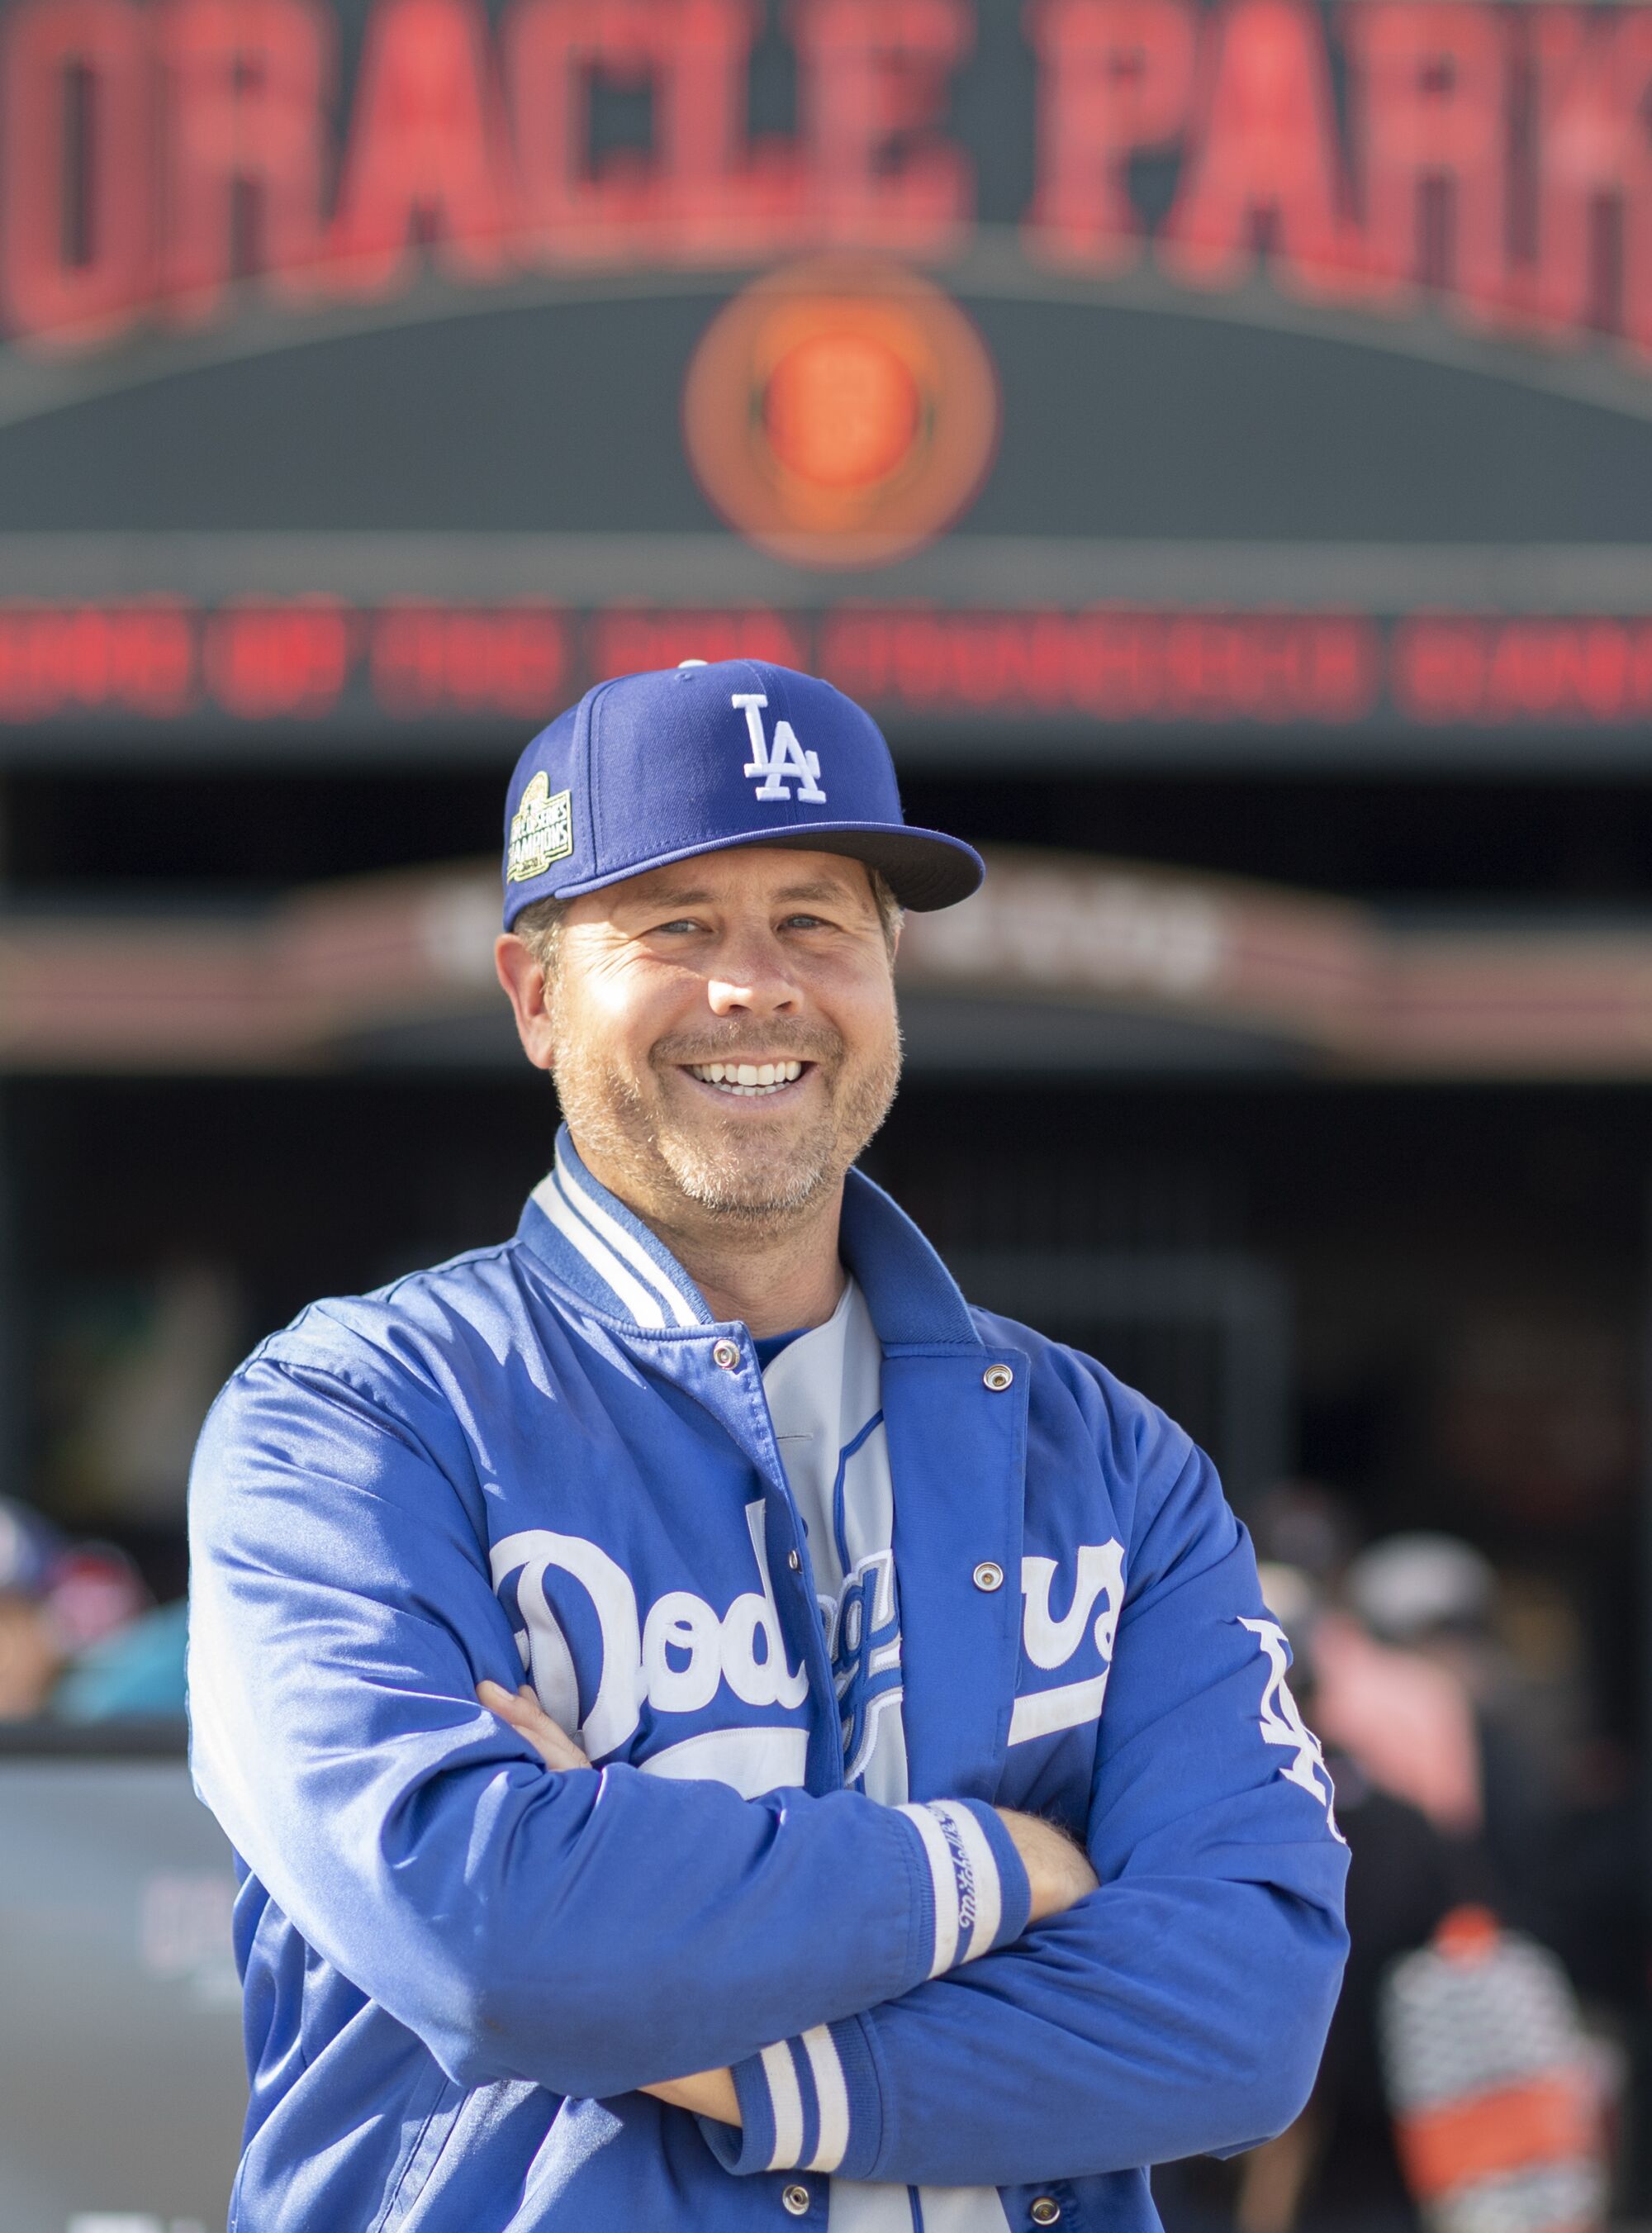 Dodgers fan Steve Mariani in a Dodgers hat and jacket.